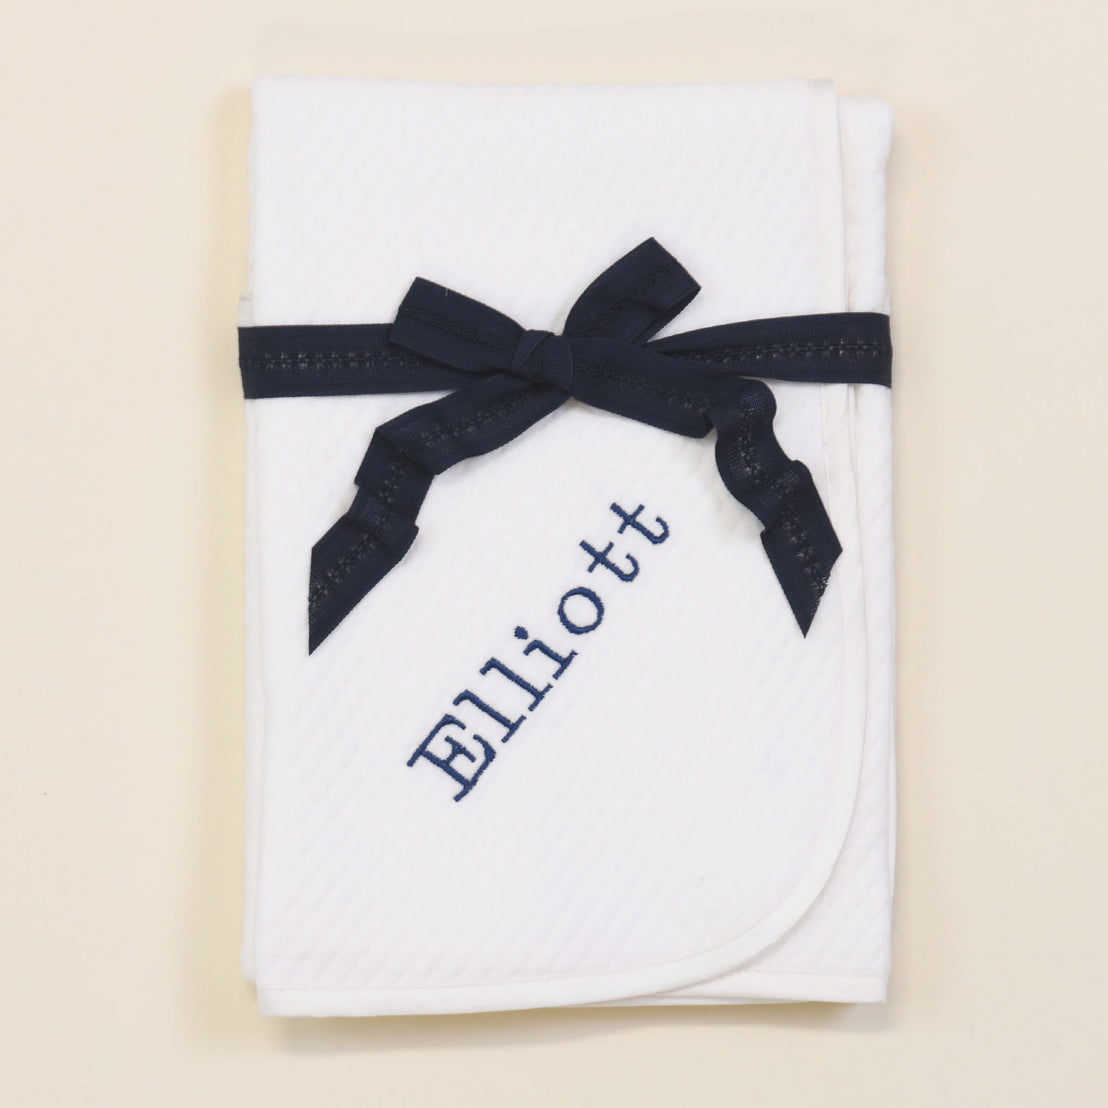 Flat lay photo of the Elliott Personalized Blanket folded up and tied with a navy ribbon. The blanket is made out of a soft white 100% quilted cotton,  one corner has the name "Elliott" embroidered in navy.